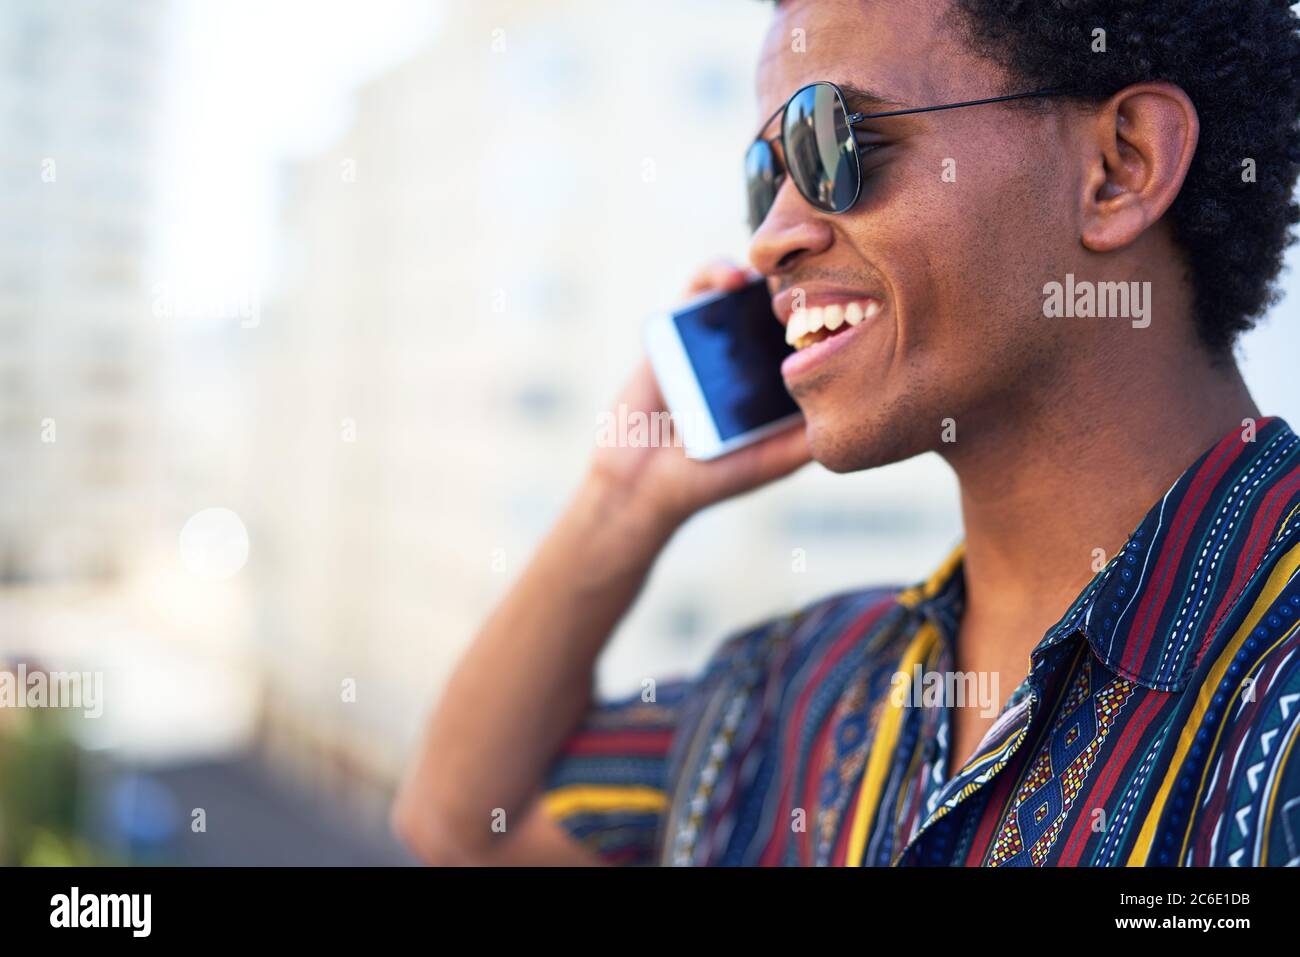 Smiling young man talking on smart phone Stock Photo